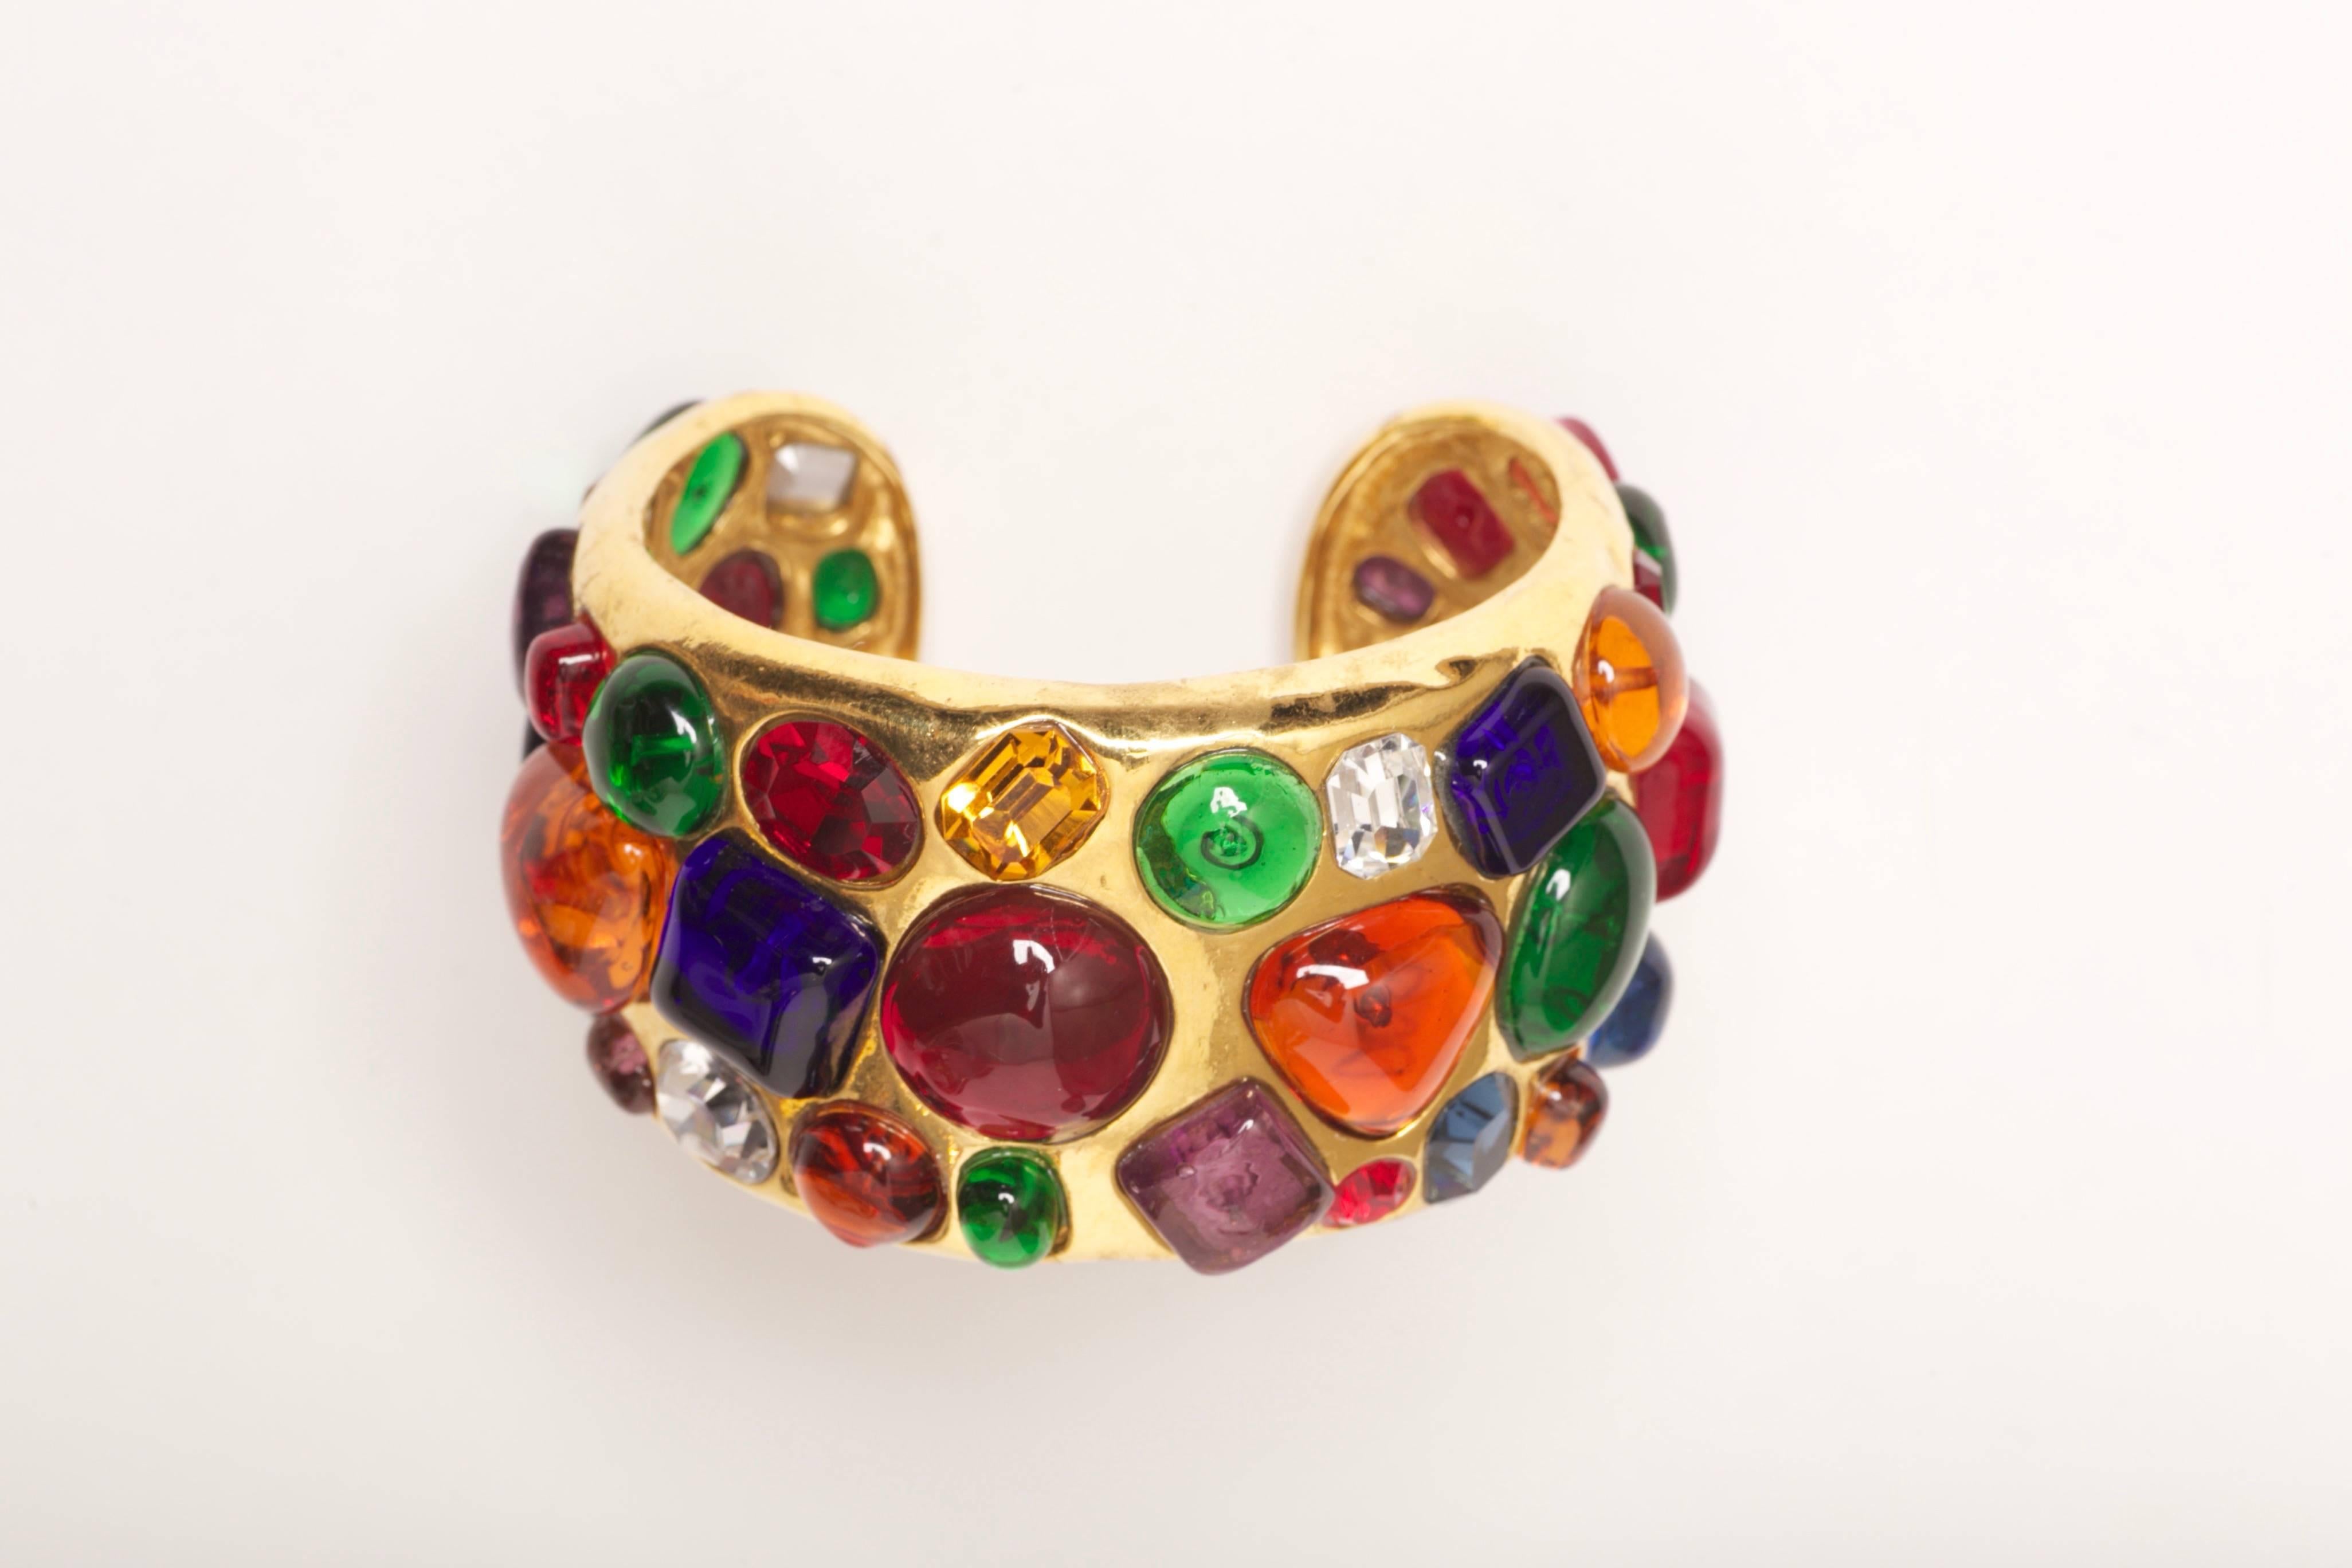 Substantial Chanel Gripoix Cuff Bracelet Collection 26 from 1988

Heavily embellished Chanel cuff with open back high relief Gripoix poured glass in varied colors and shapes and open back emerald cut crystals in sapphire, topaz and diamond colors.